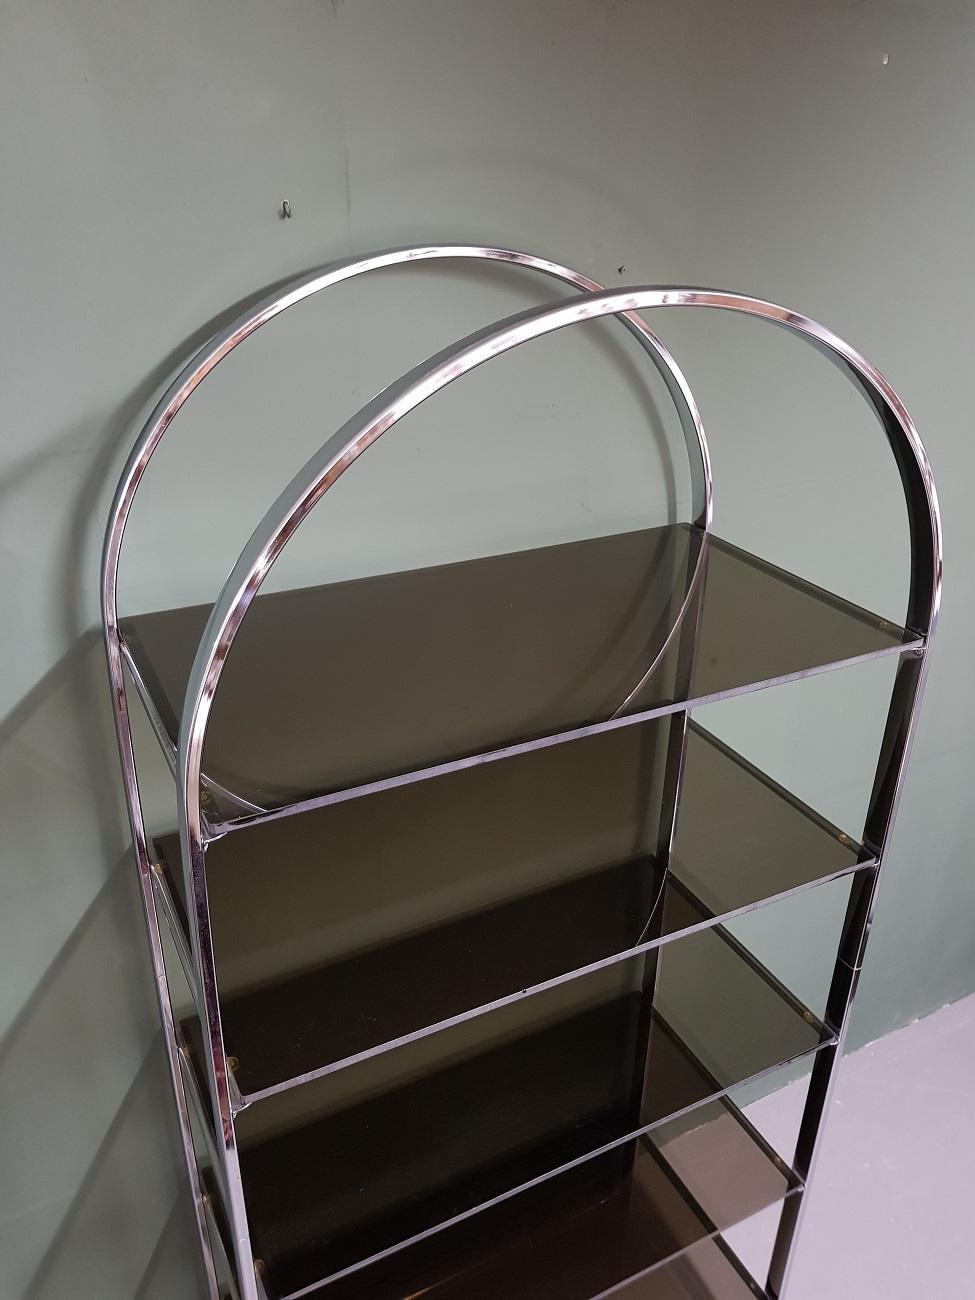 Mid-Century Modern vintage Milo Baughman style chrome etagere with five smoked glass shelves from the 1970s, some glass shelves have a few chips and the frame has light oxidation spots.

The measurements are:
Depth 43.5 cm/ 17.1 inch.
Width 84.5 cm/